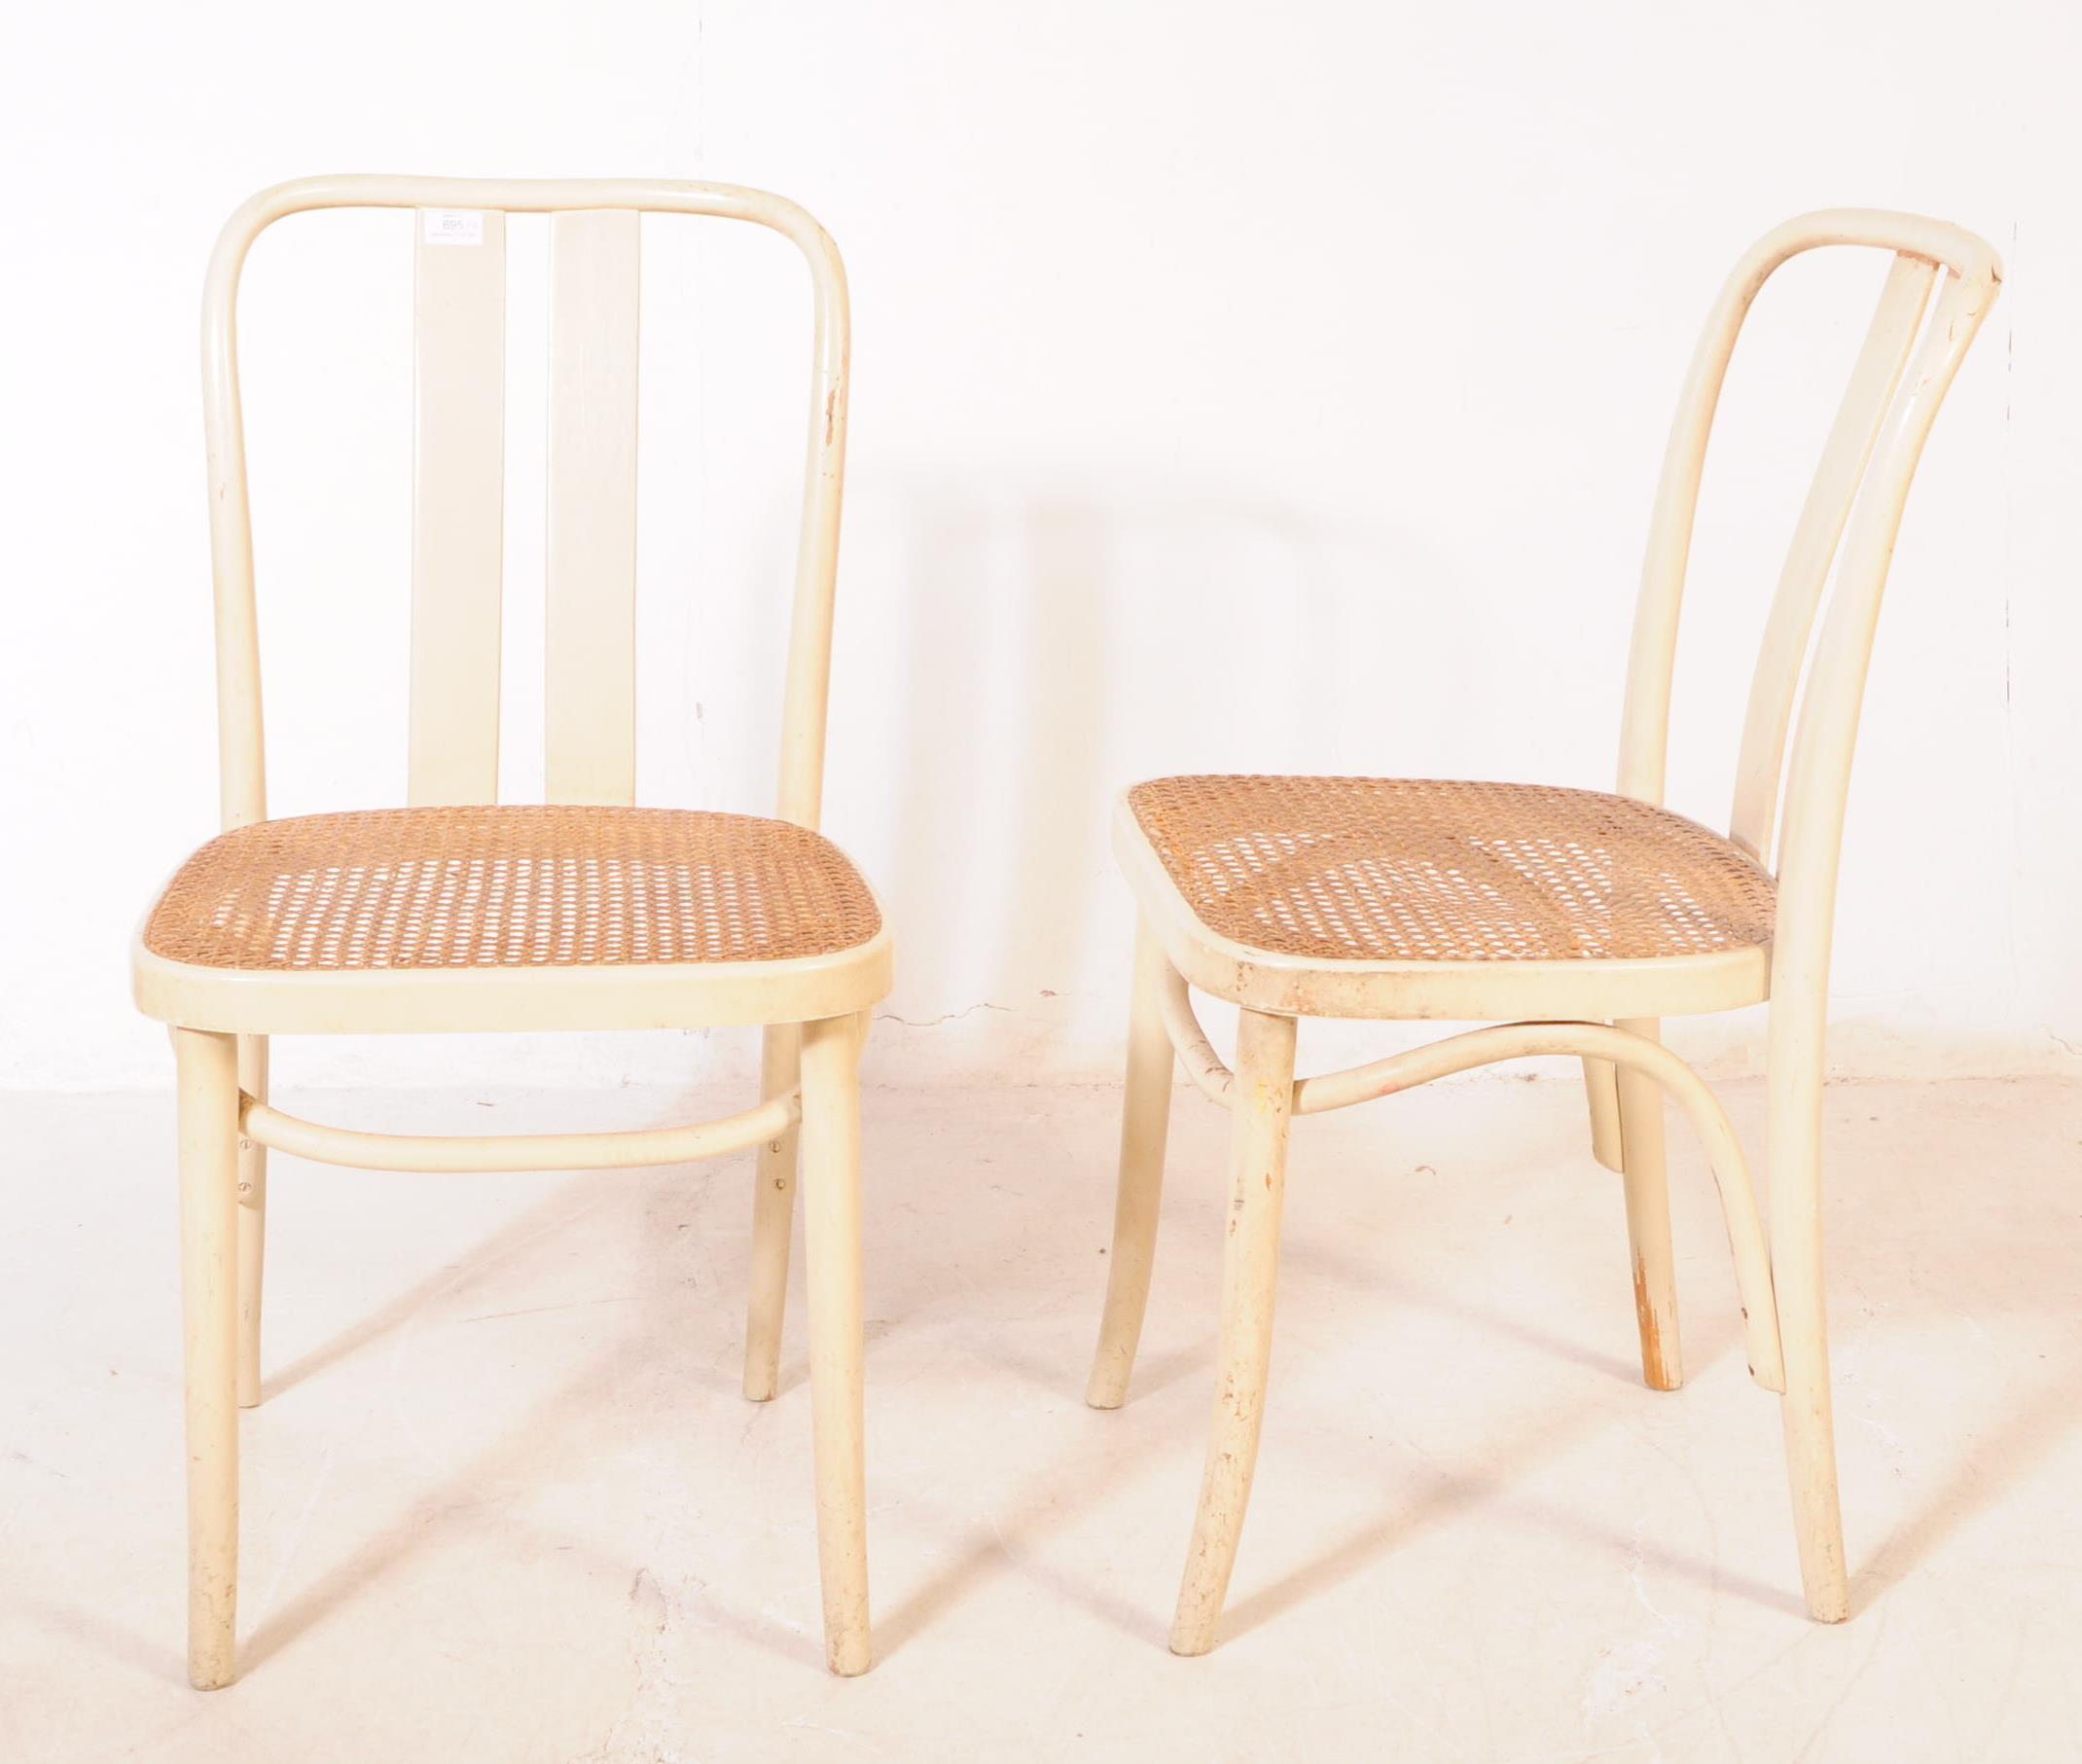 THONET MANNER - SIX BENTWOOD & RATTAN DINING CHAIRS - Image 2 of 3